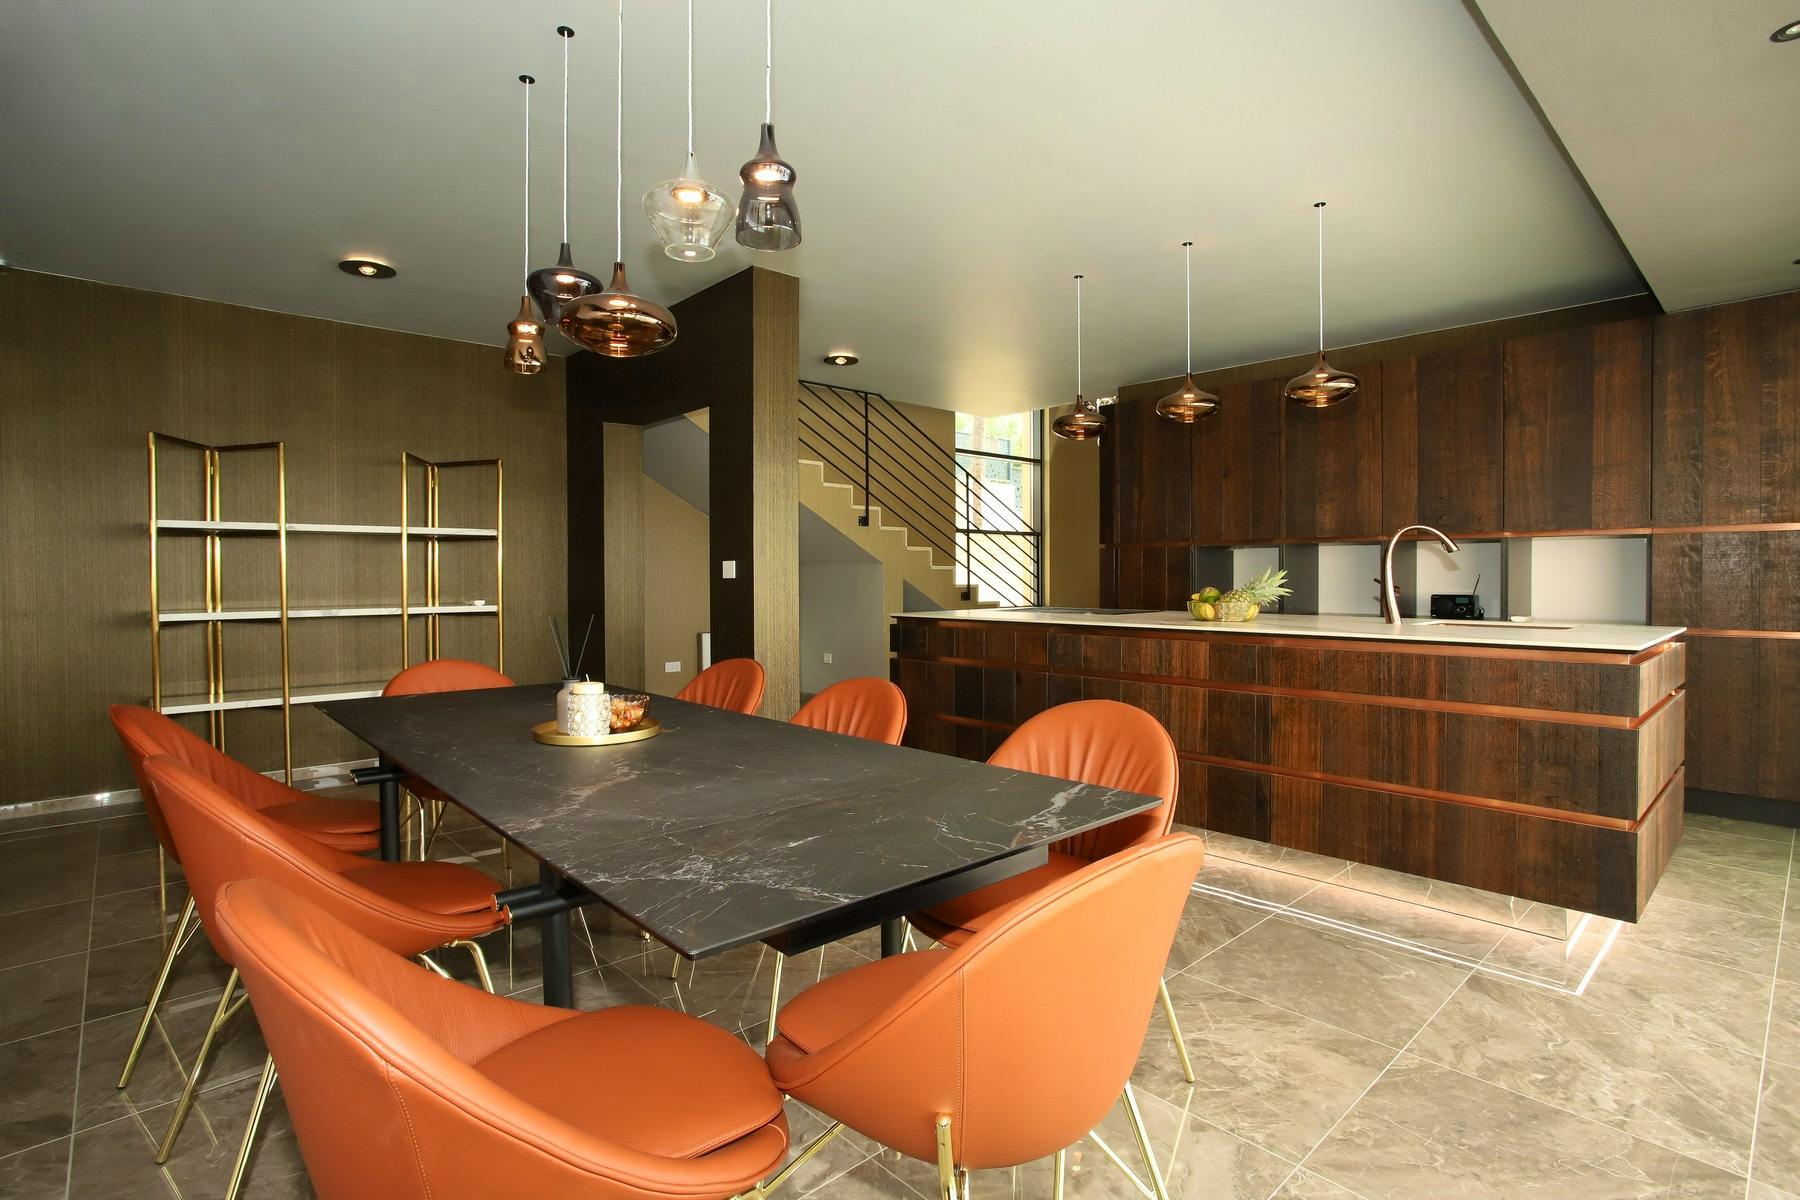 Open space with kitchen and dining table